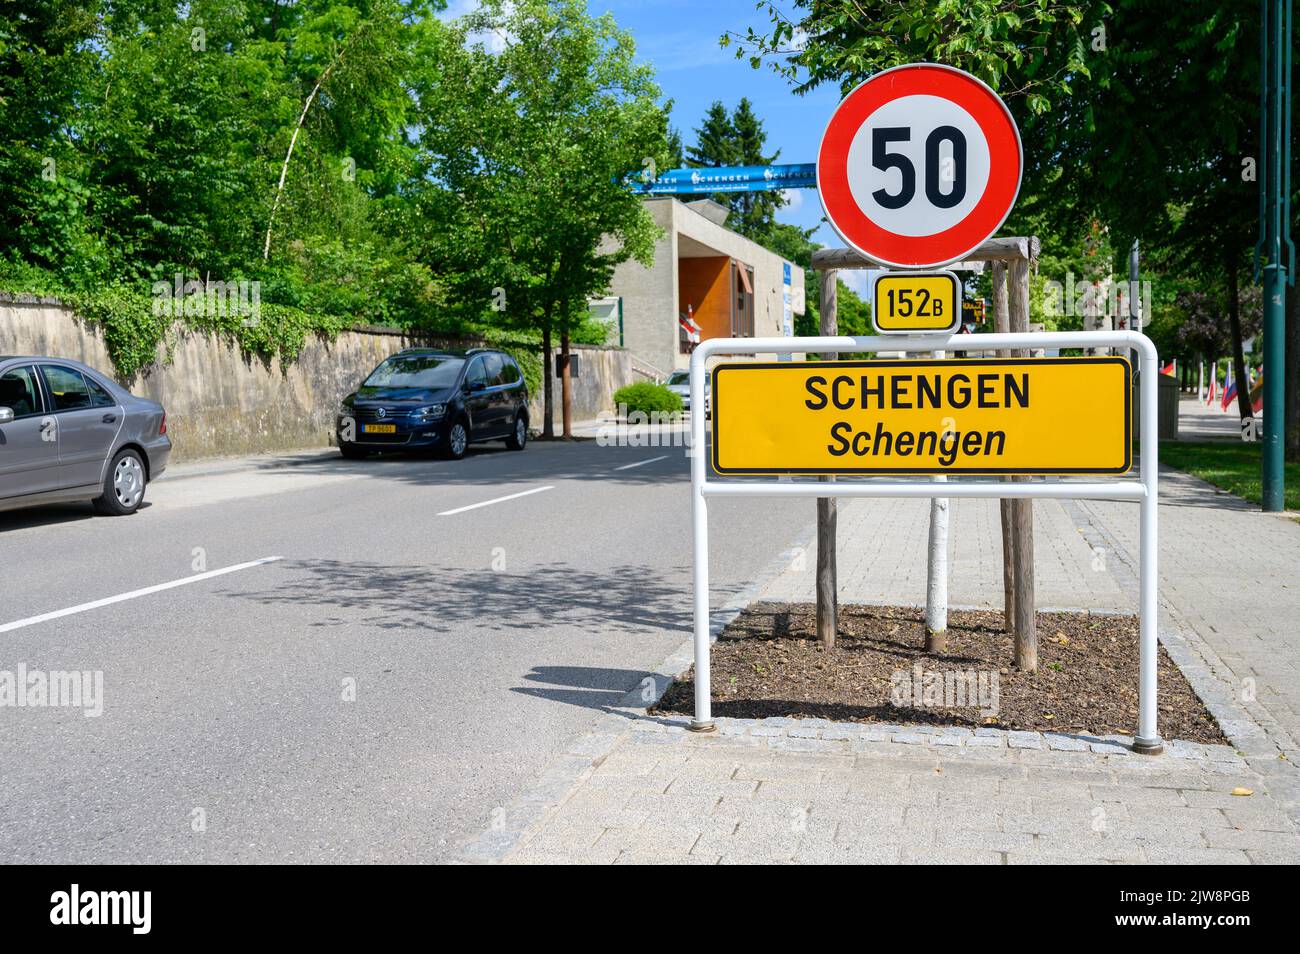 Schengen, Luxembourg, the town where the famous Schengen Agreement was signed on 14 June 1985. Stock Photo